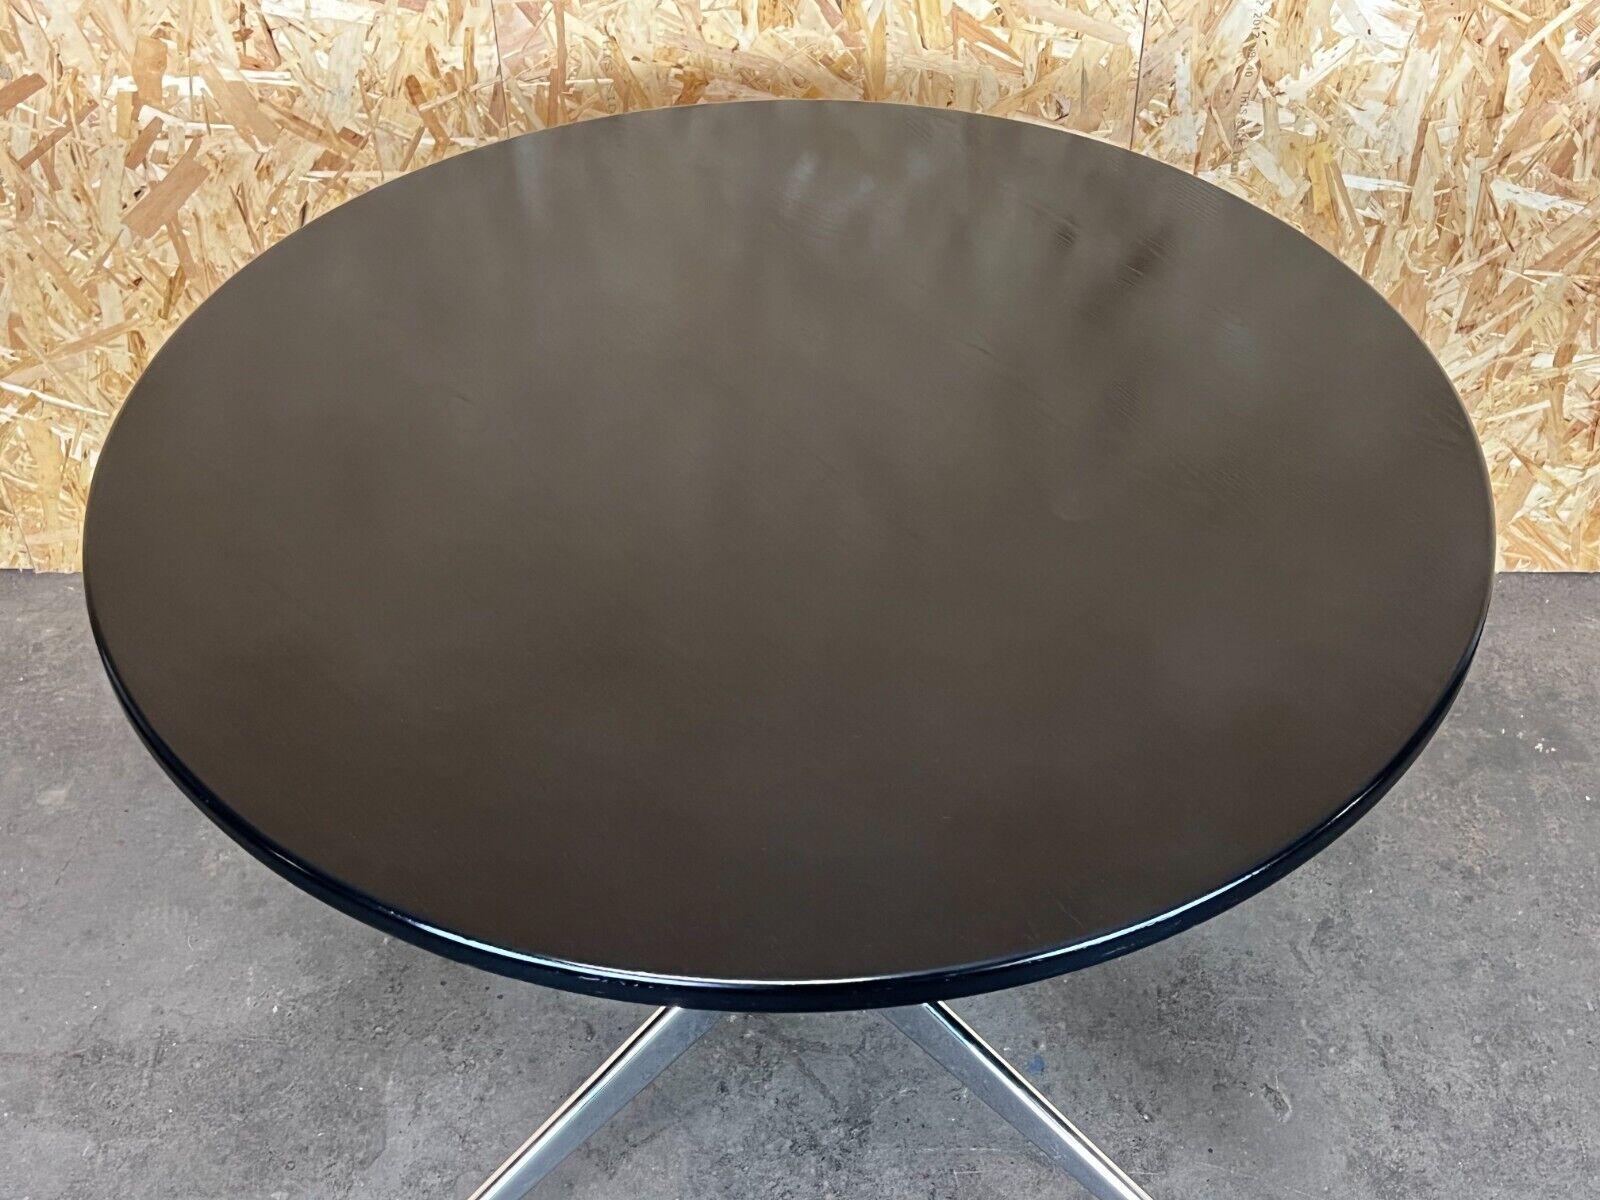 Metal Segmented Table by Charles & Ray Eames for Vitra Black Chrome